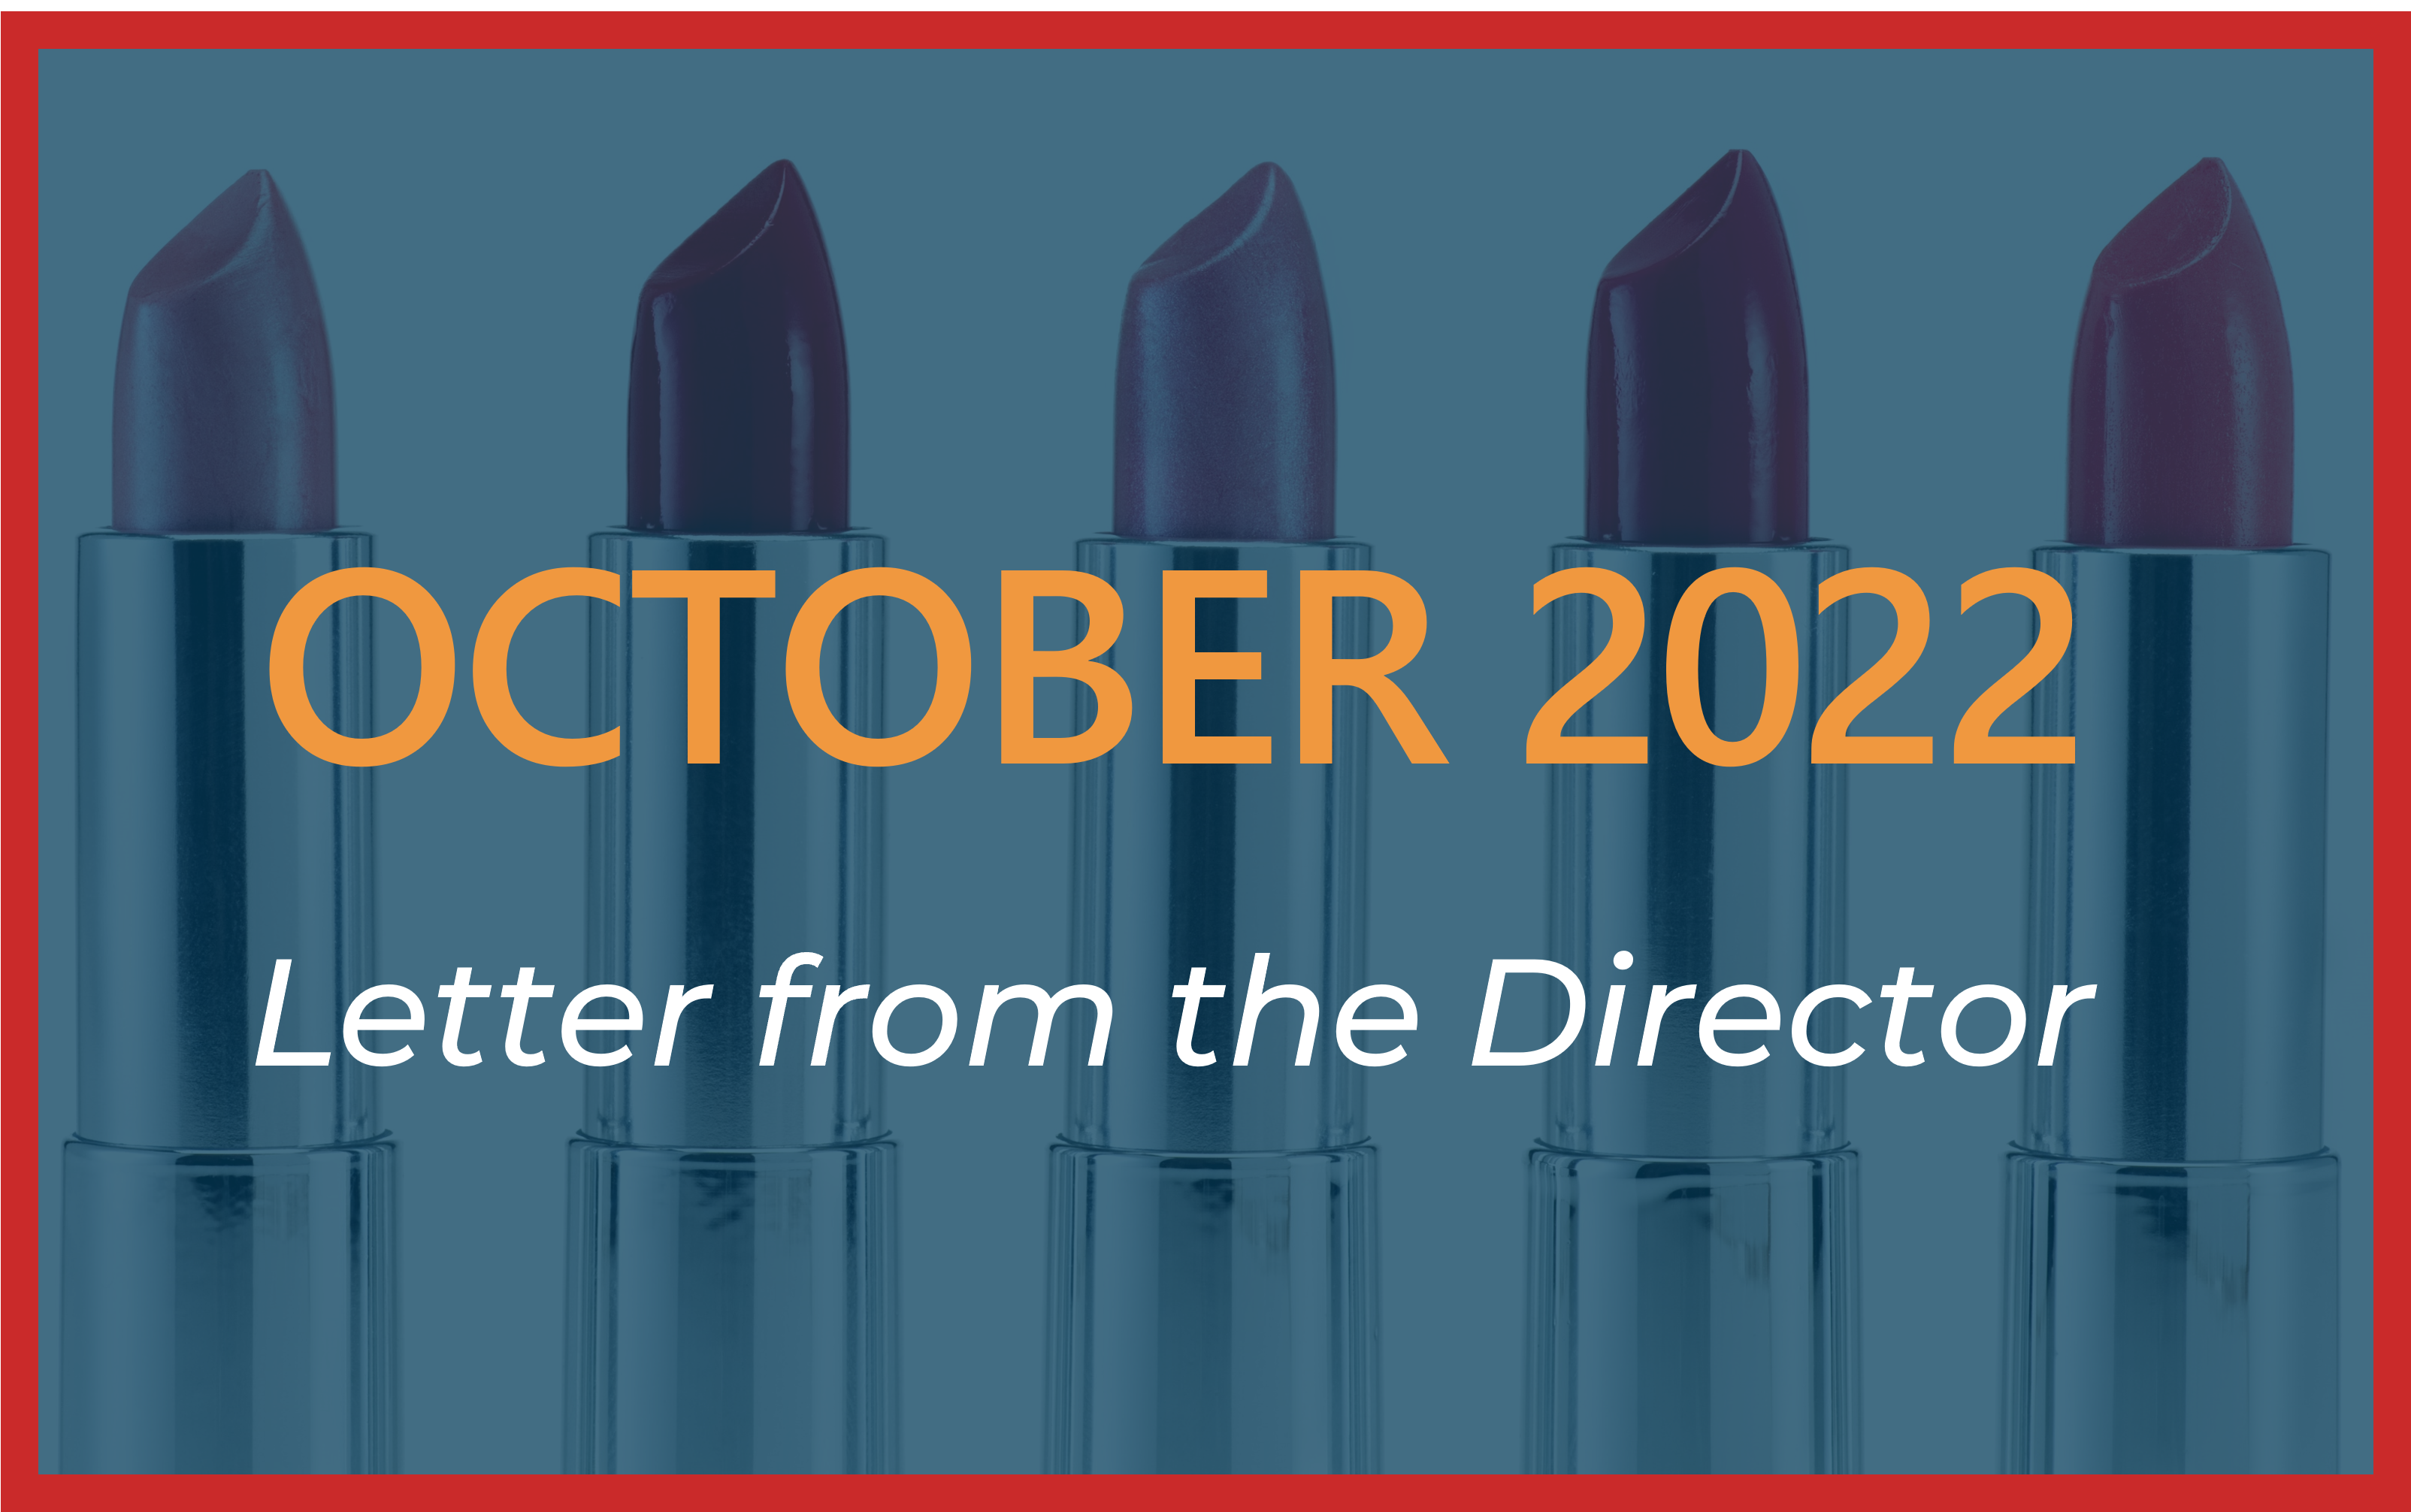 October 2022 Letter from the Director